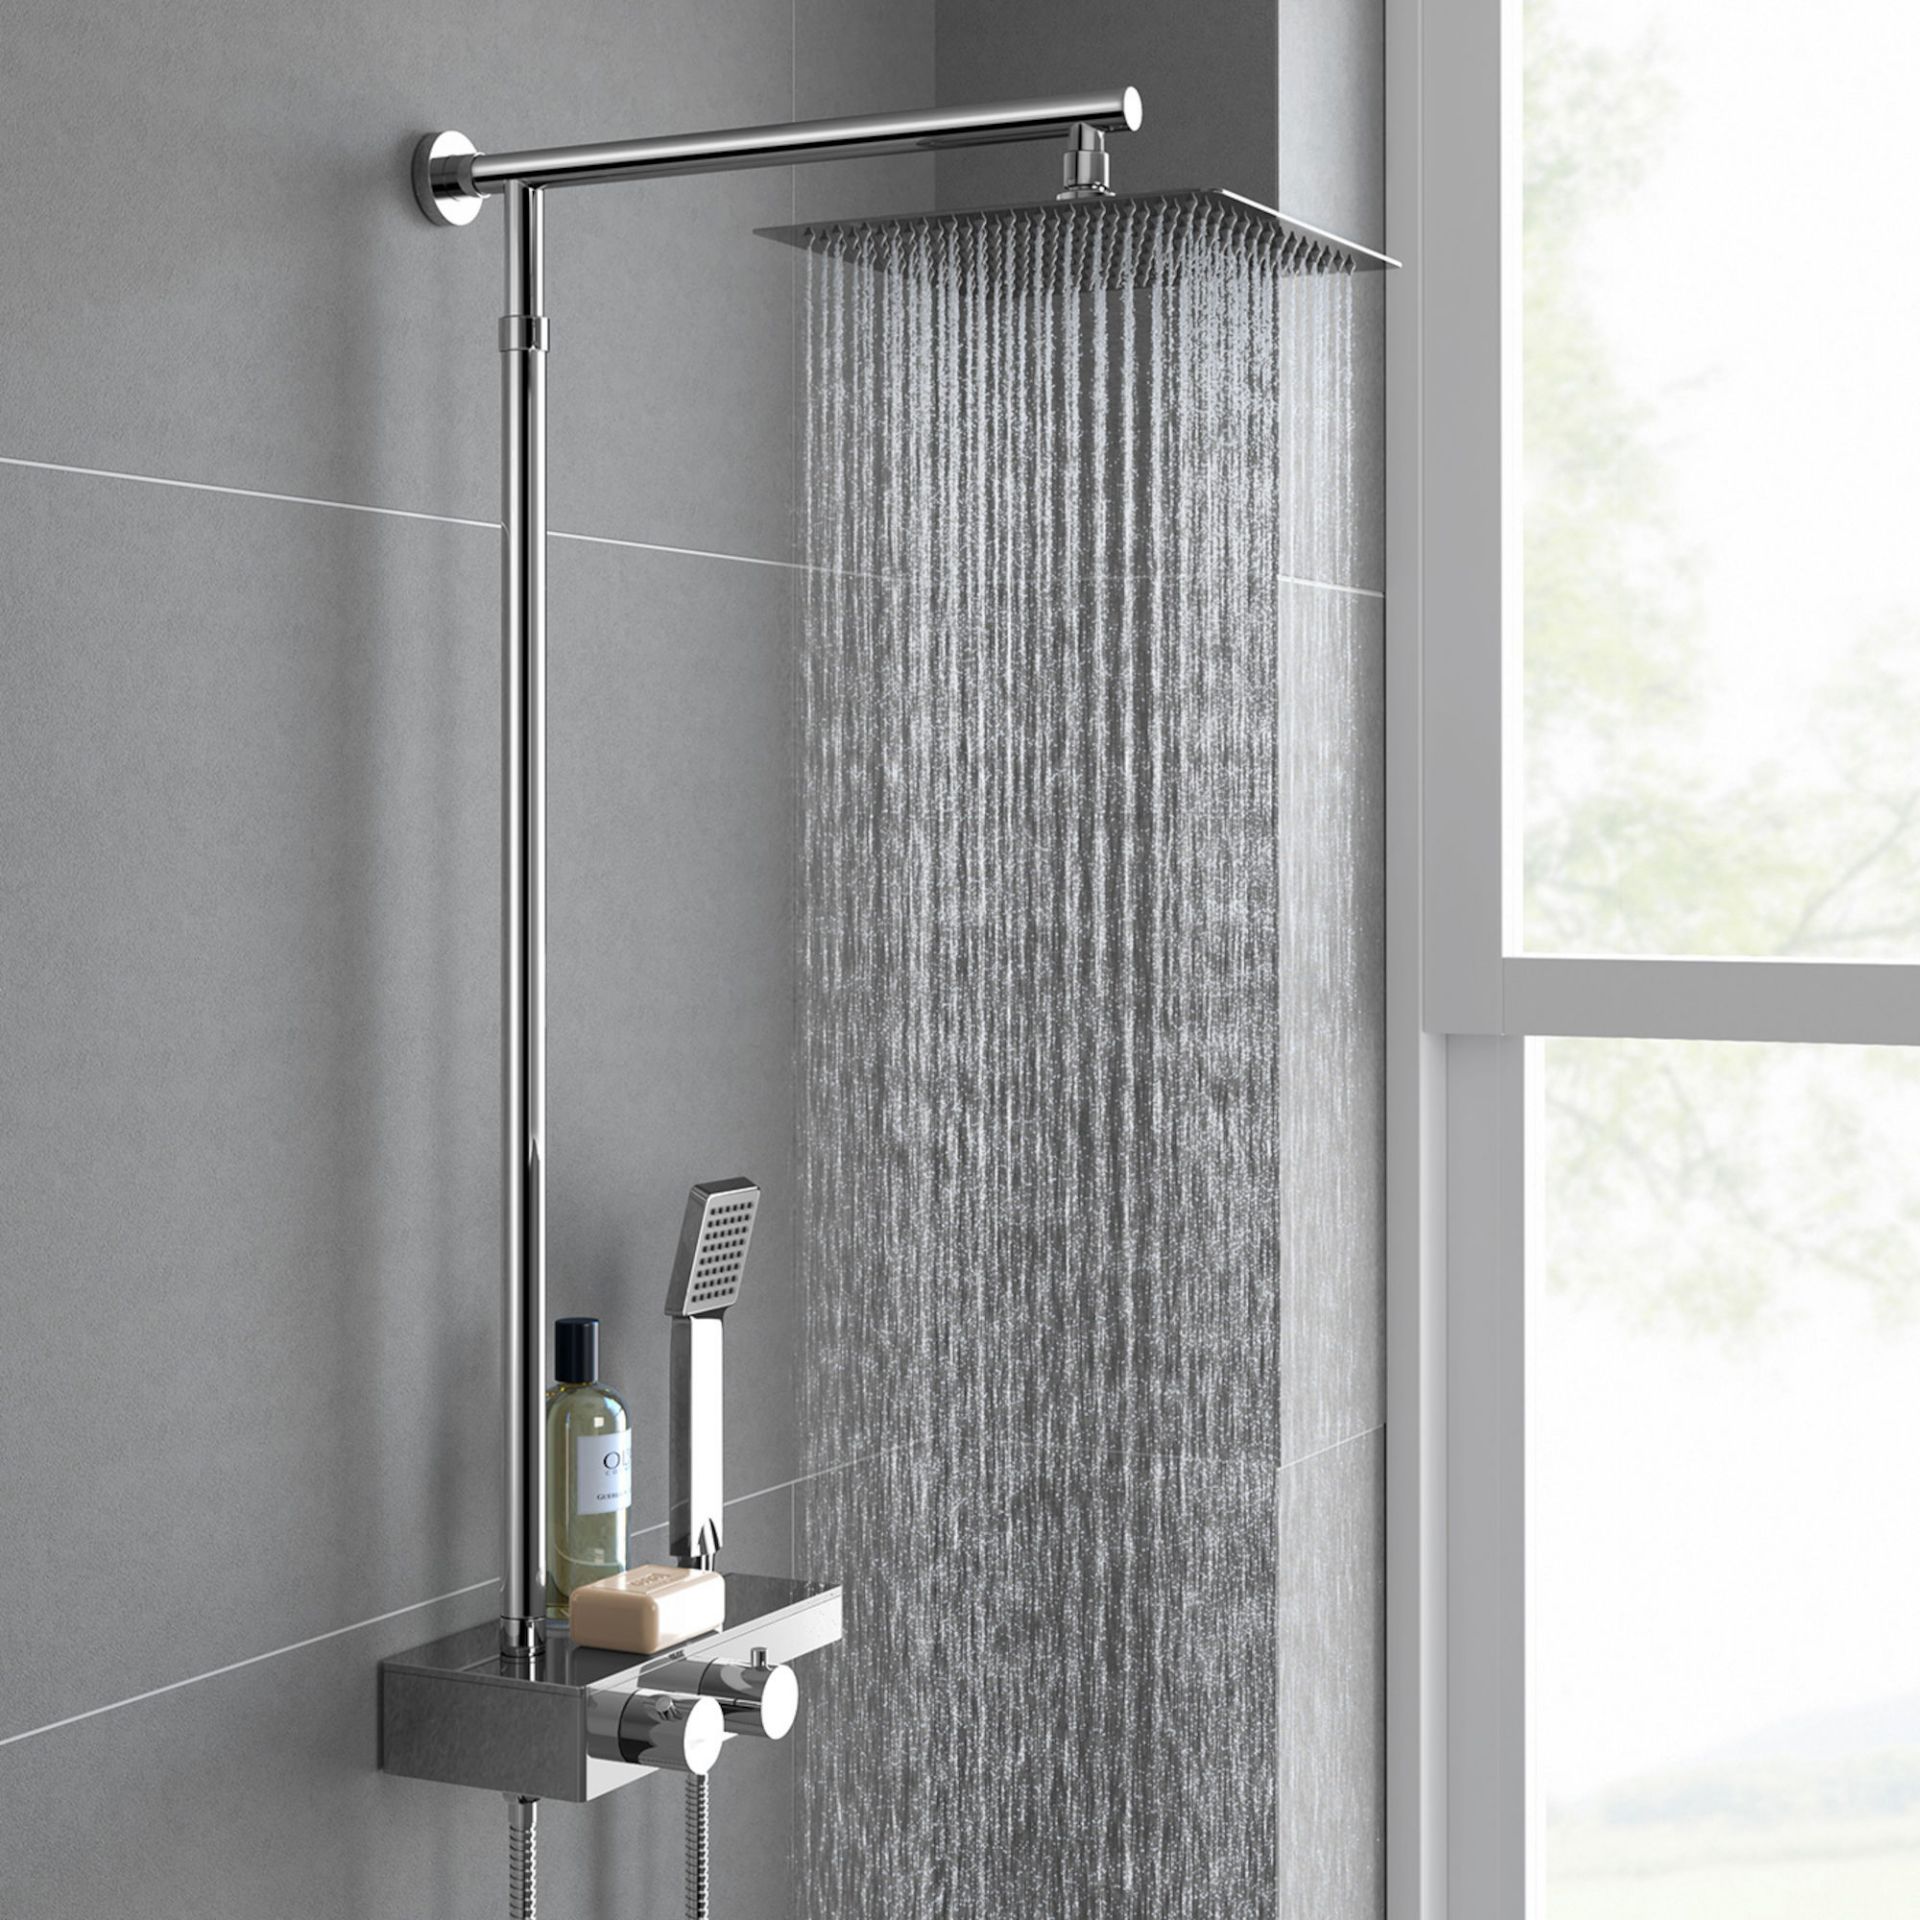 (CT228) Square Exposed Thermostatic Shower Shelf - Image 2 of 8